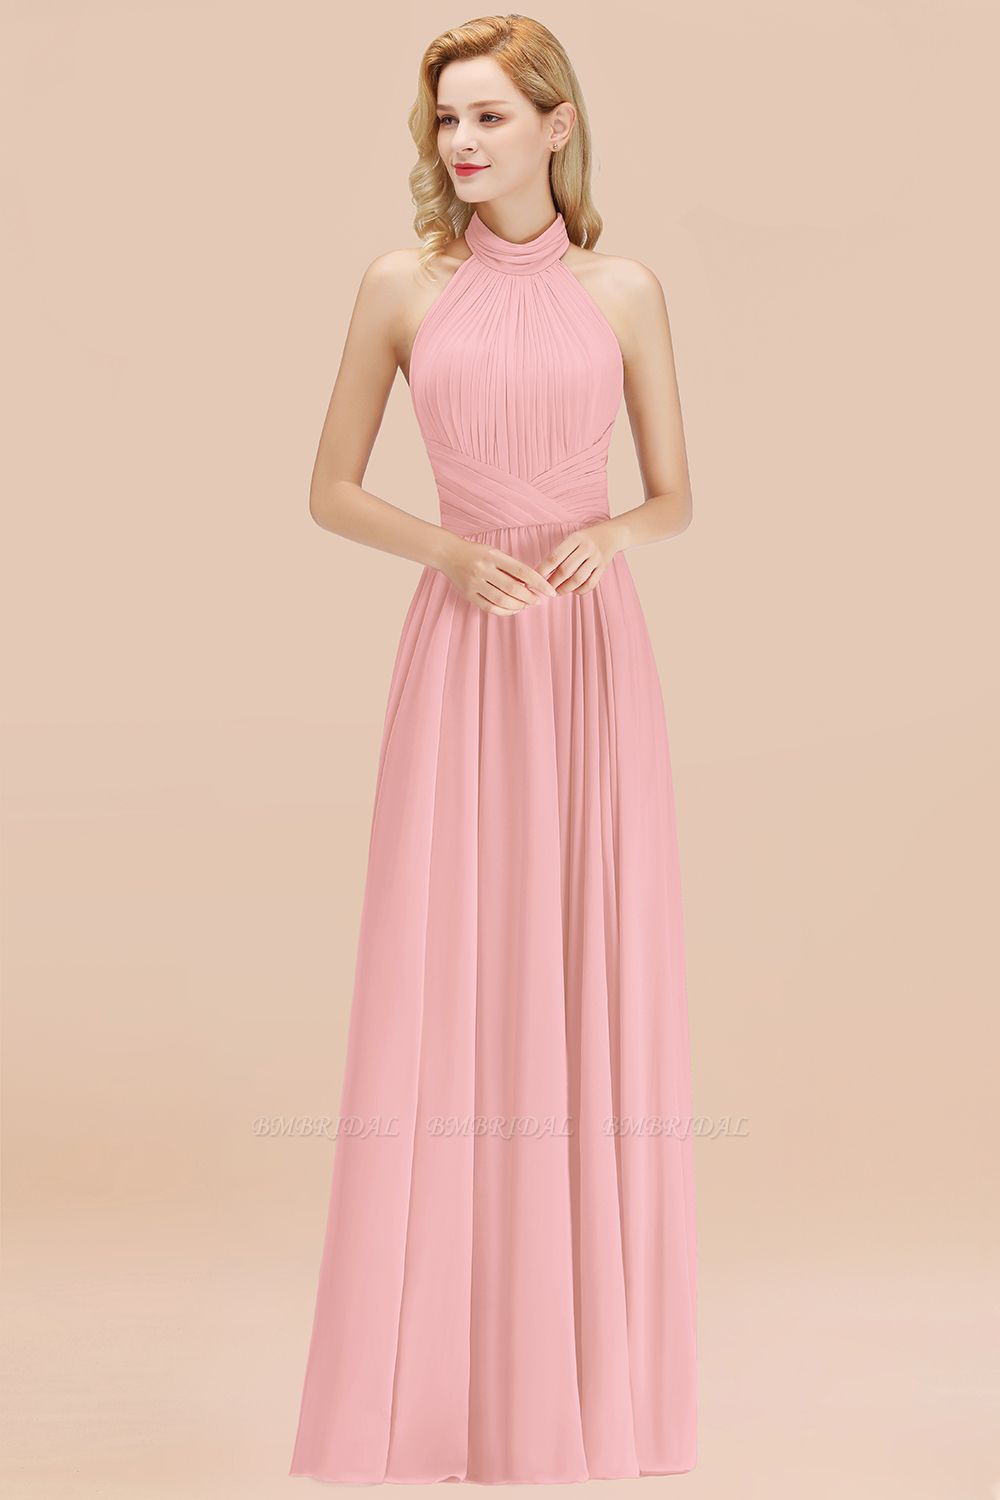 BMbridal Gorgeous High-Neck Halter Backless Bridesmaid Dress Dusty Rose Chiffon Maid of Honor Dress